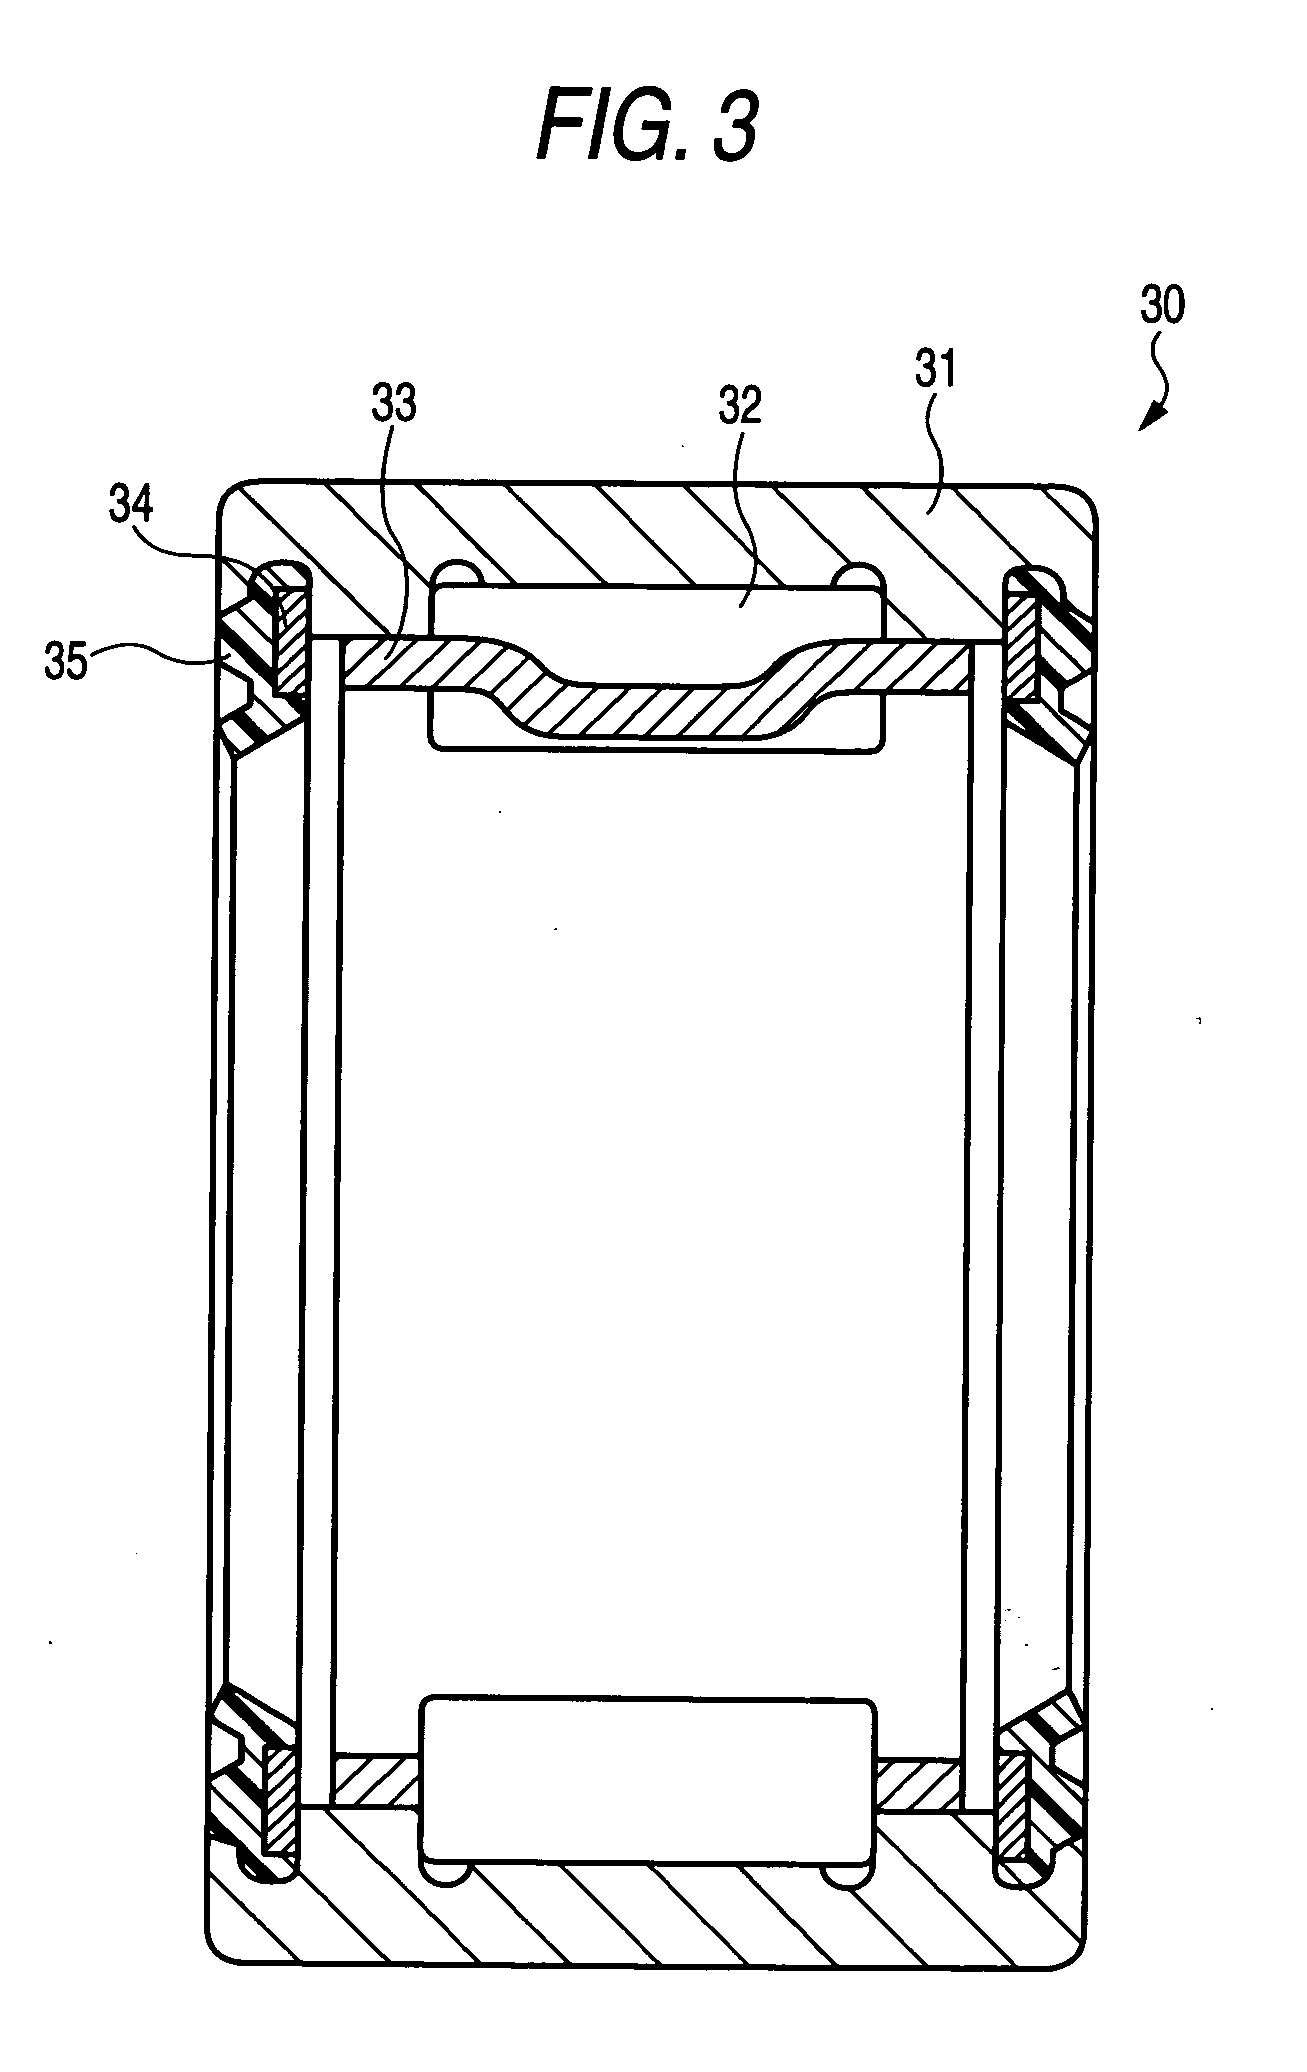 Rolling bearing, rolling bearing for fuel cell, compressor for fuel cell system and fuel cell system